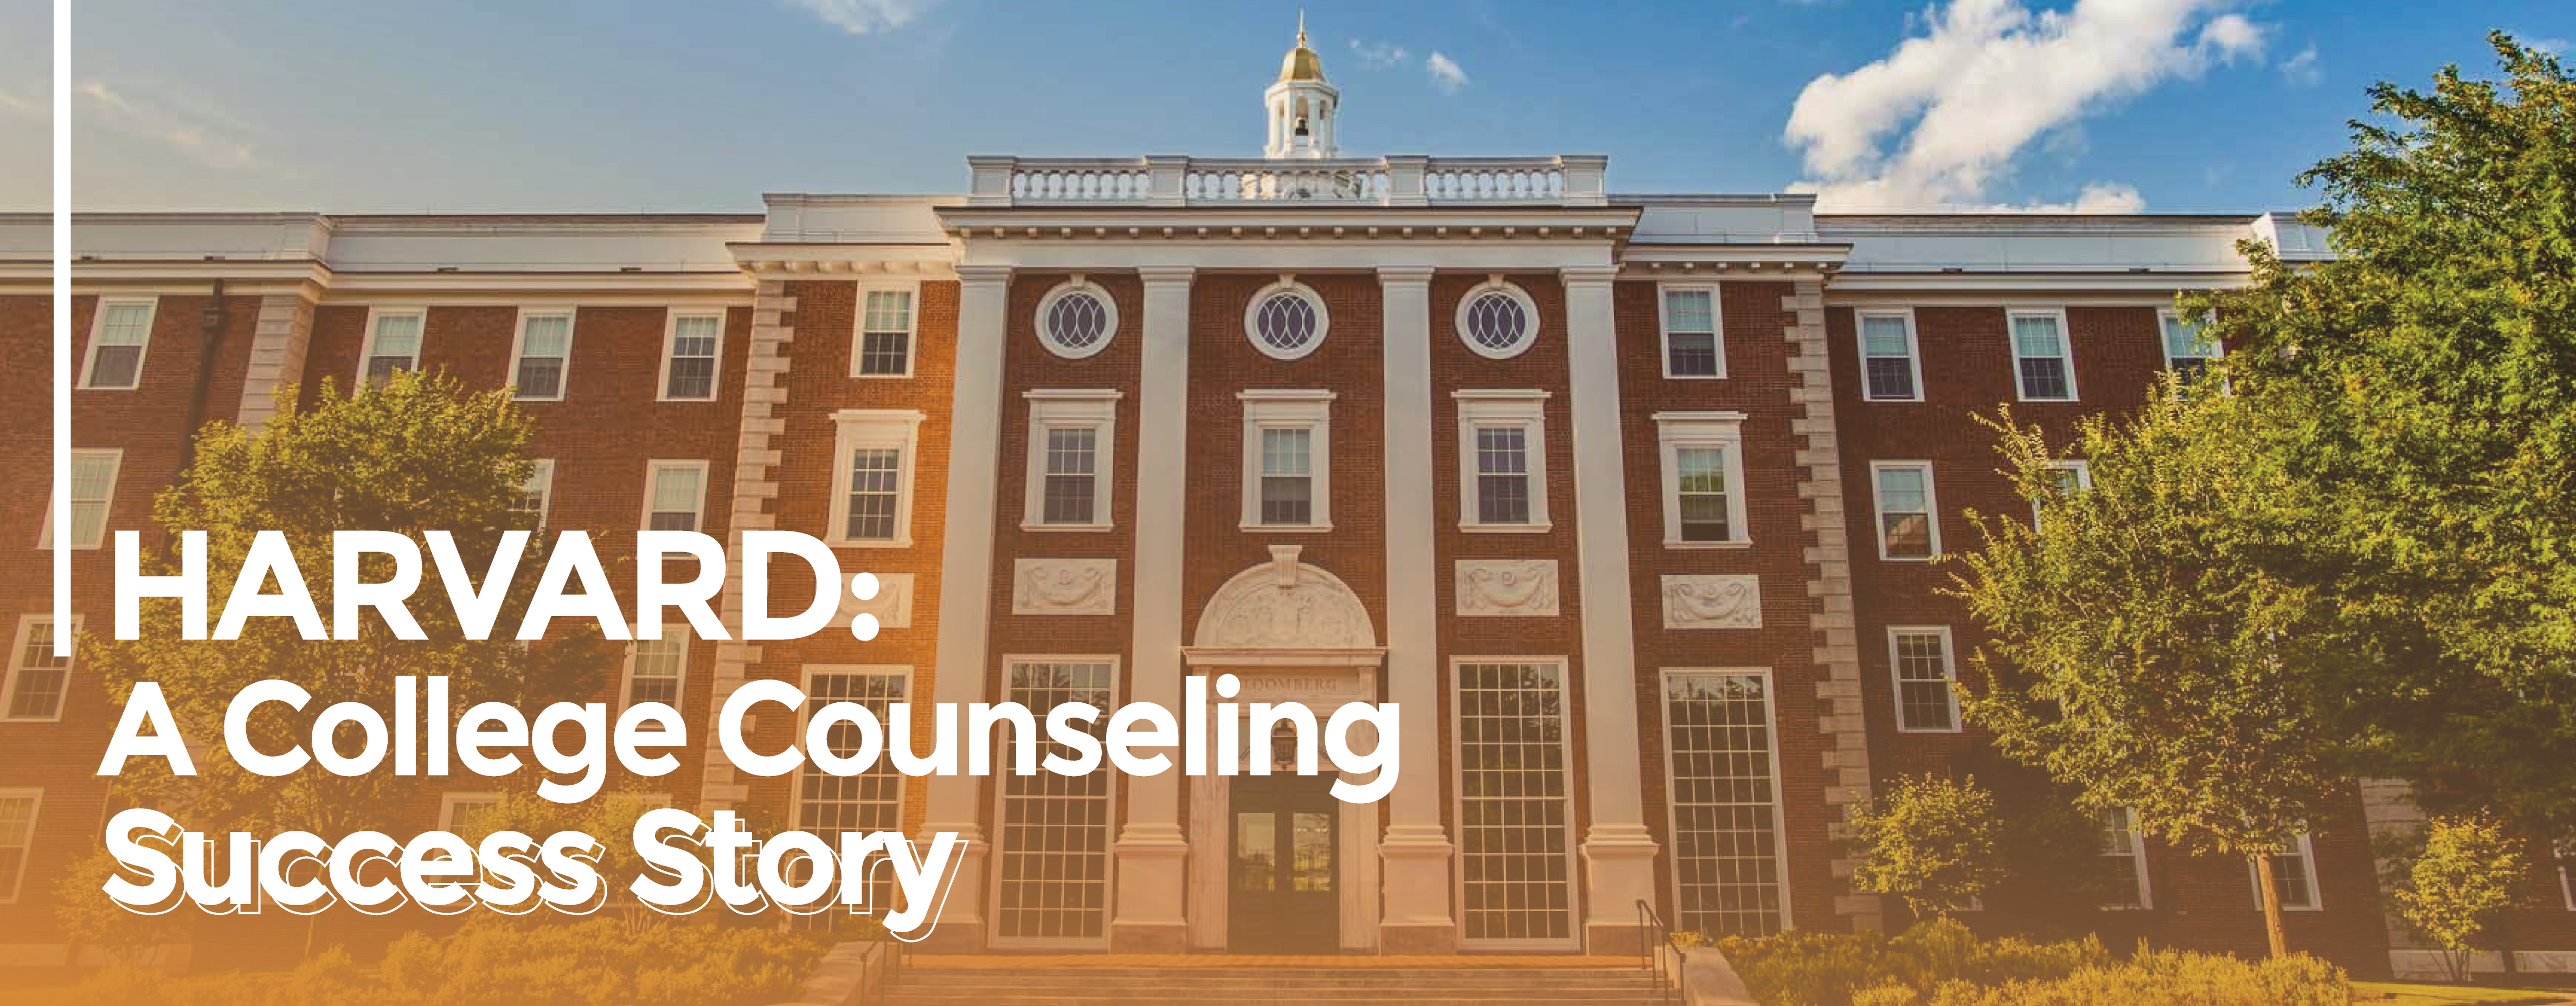 Harvard: A College Counseling Success Story